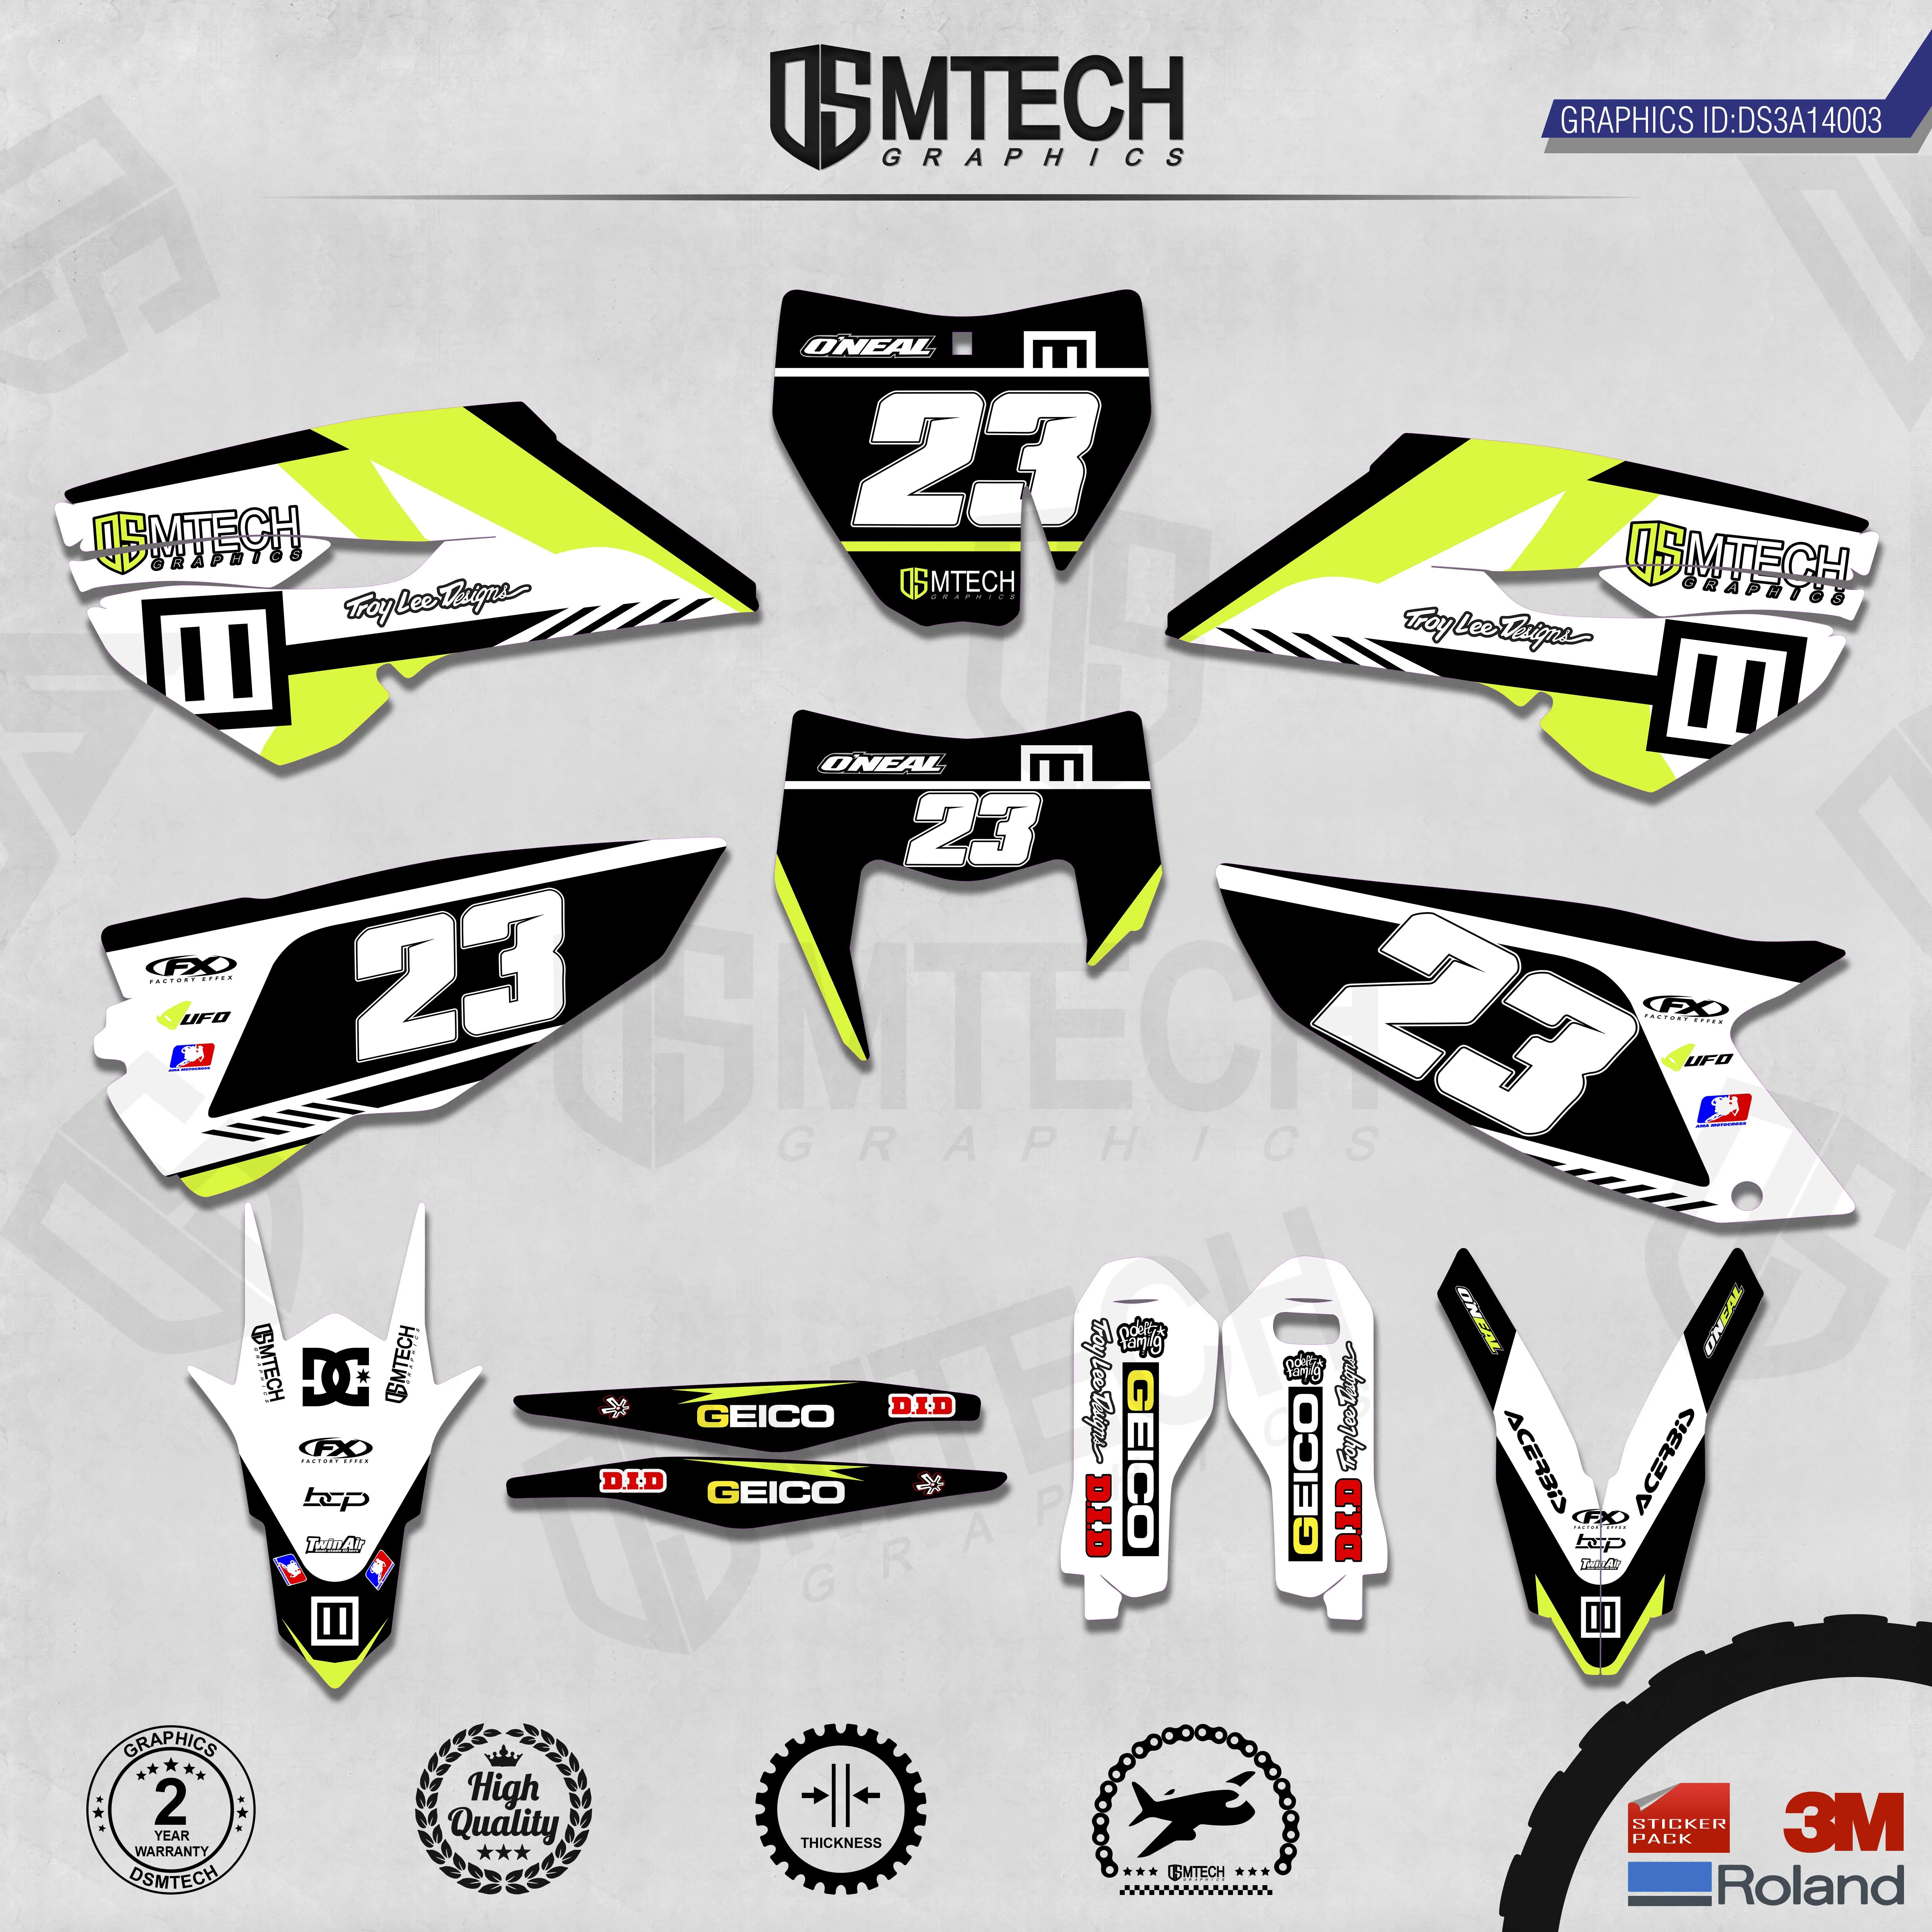 DSMTECH Customized Team Graphics Backgrounds Decals 3M Custom Stickers For 2014-2015TC-FC 2014-2016TE-FE 003